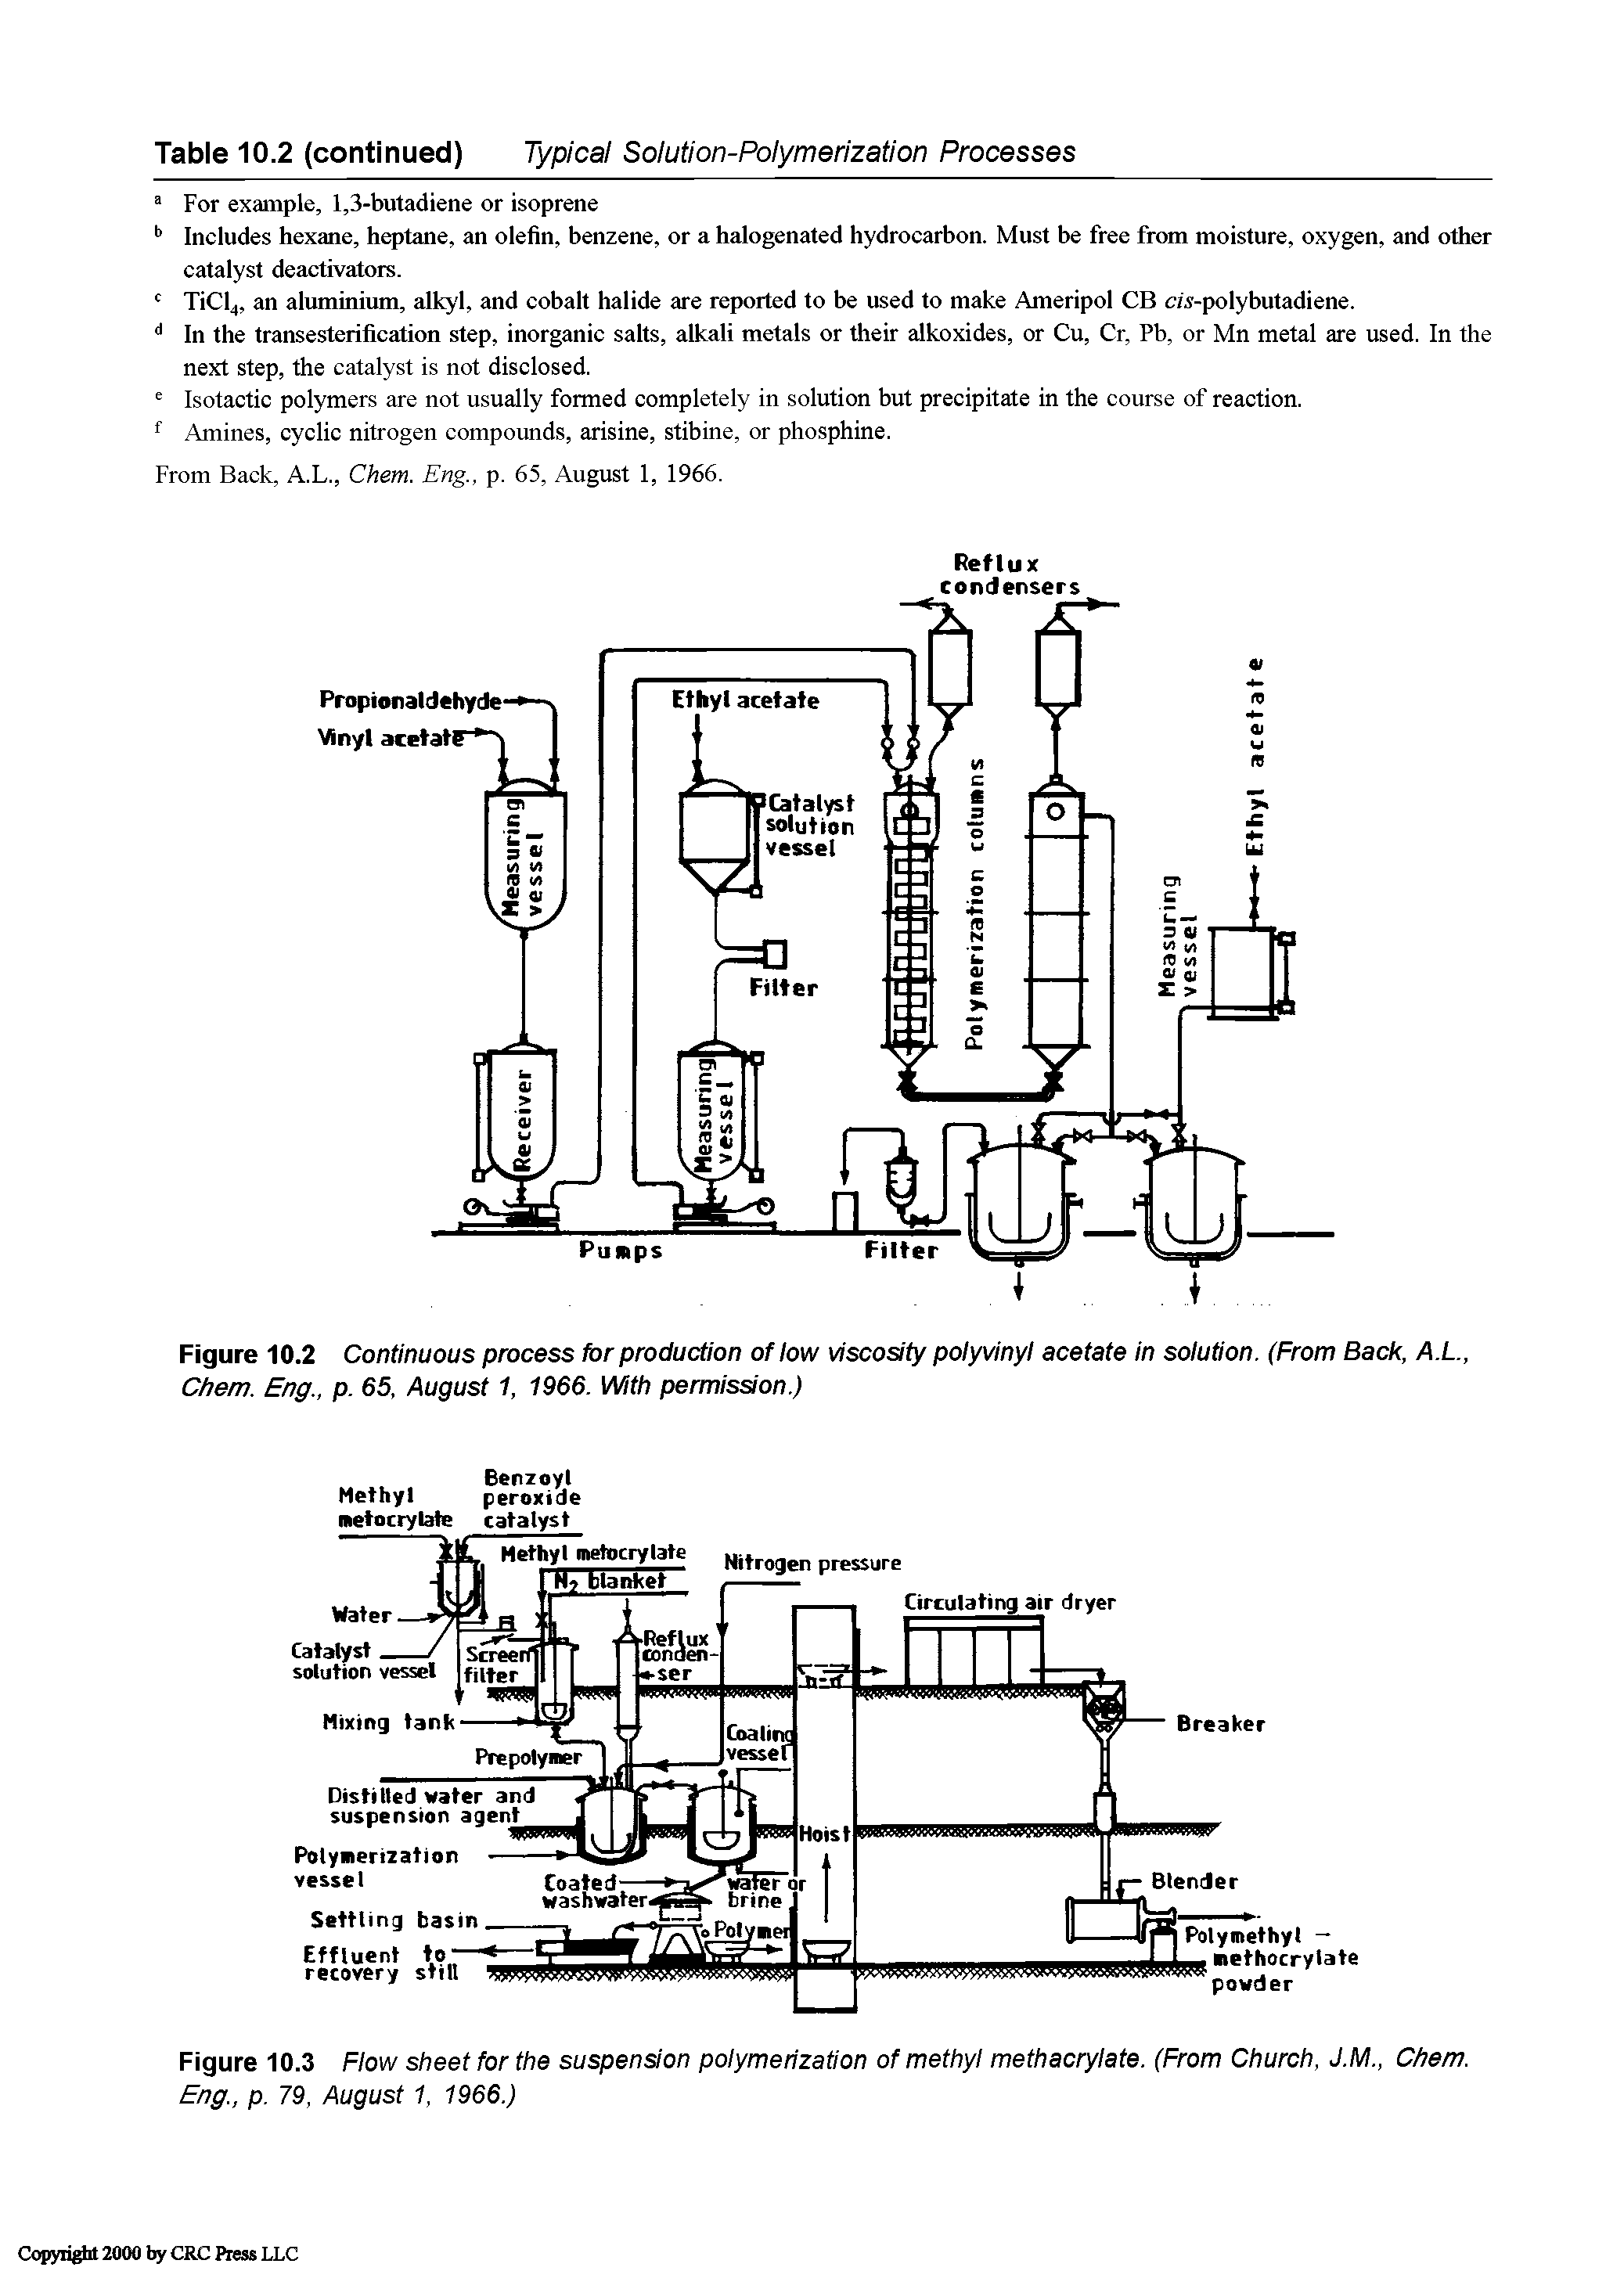 Figure 10.3 Flow sheet for the suspension polymerization of methyl methacrylate. (From Church, J.M., Chem. Eng., p. 79, August 1, 1966.)...